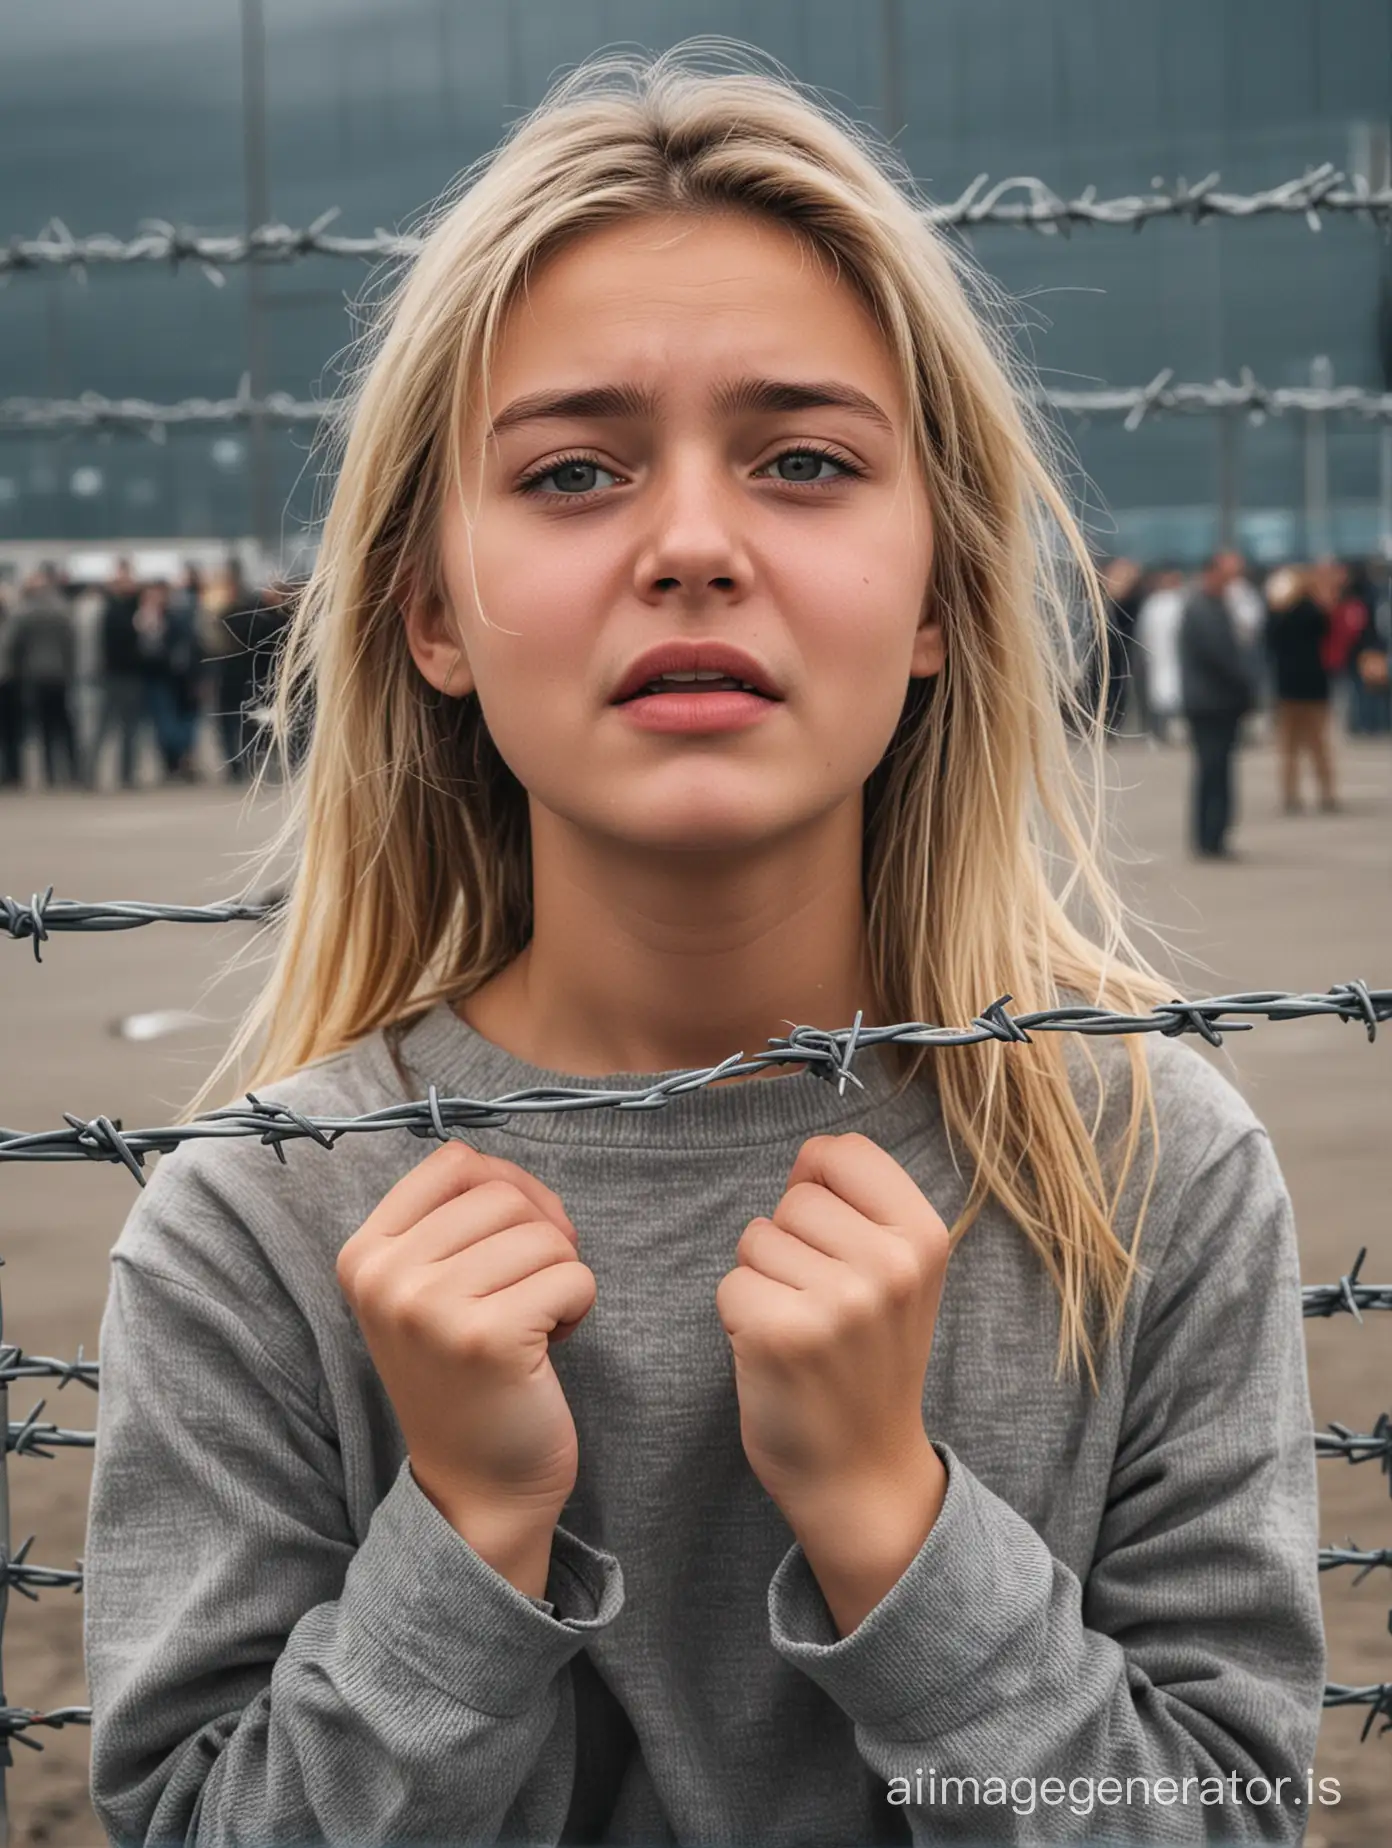 A girl is standing behind the barbed wire fence at the airport crying.